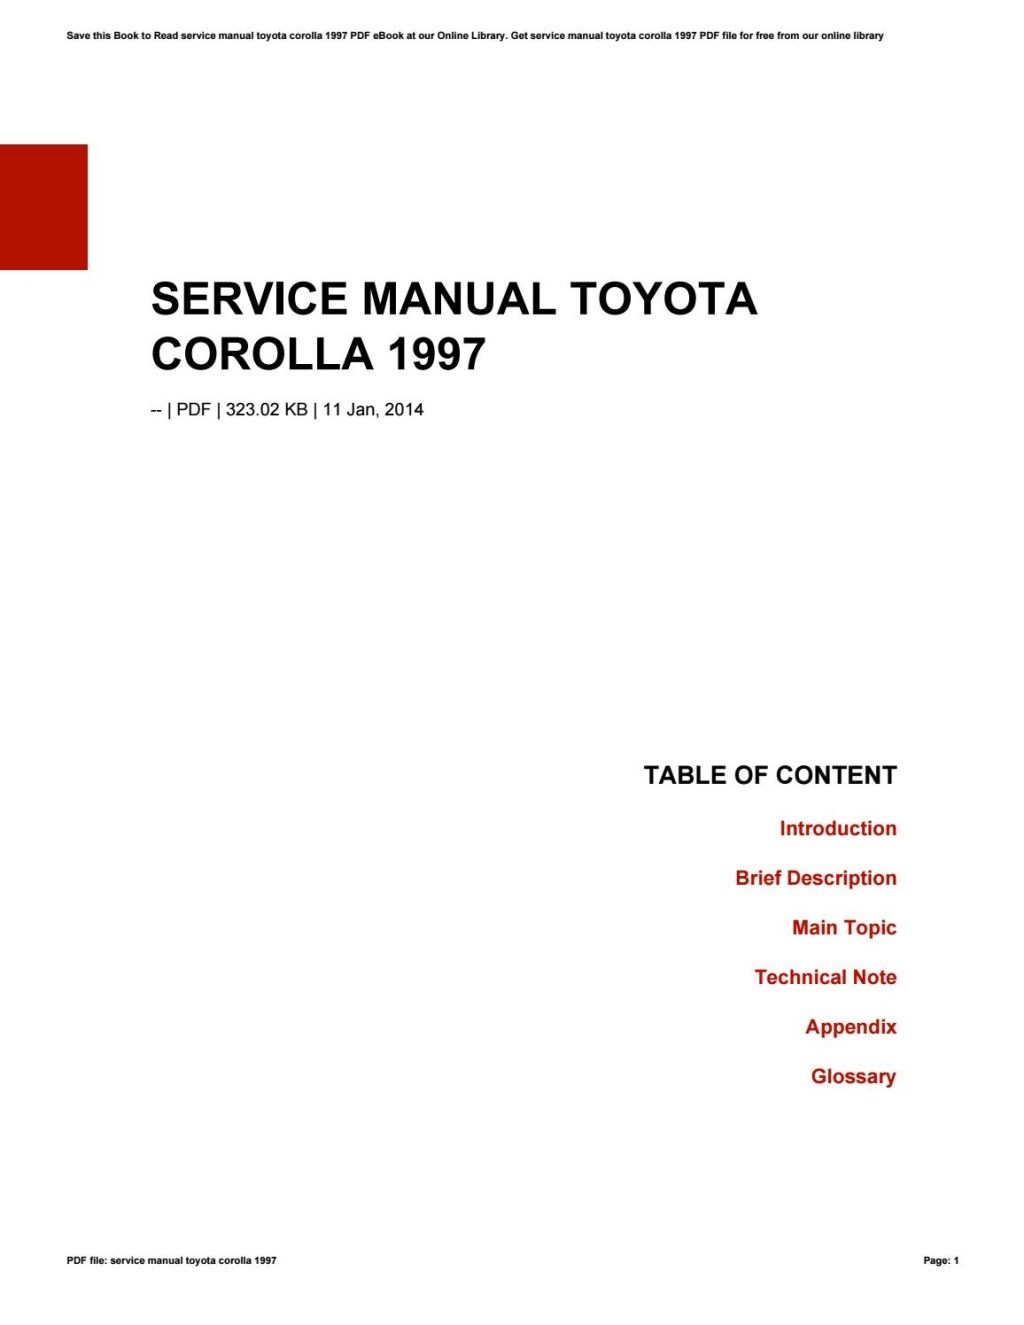 Picture of: Service manual toyota corolla  by szerz – Issuu